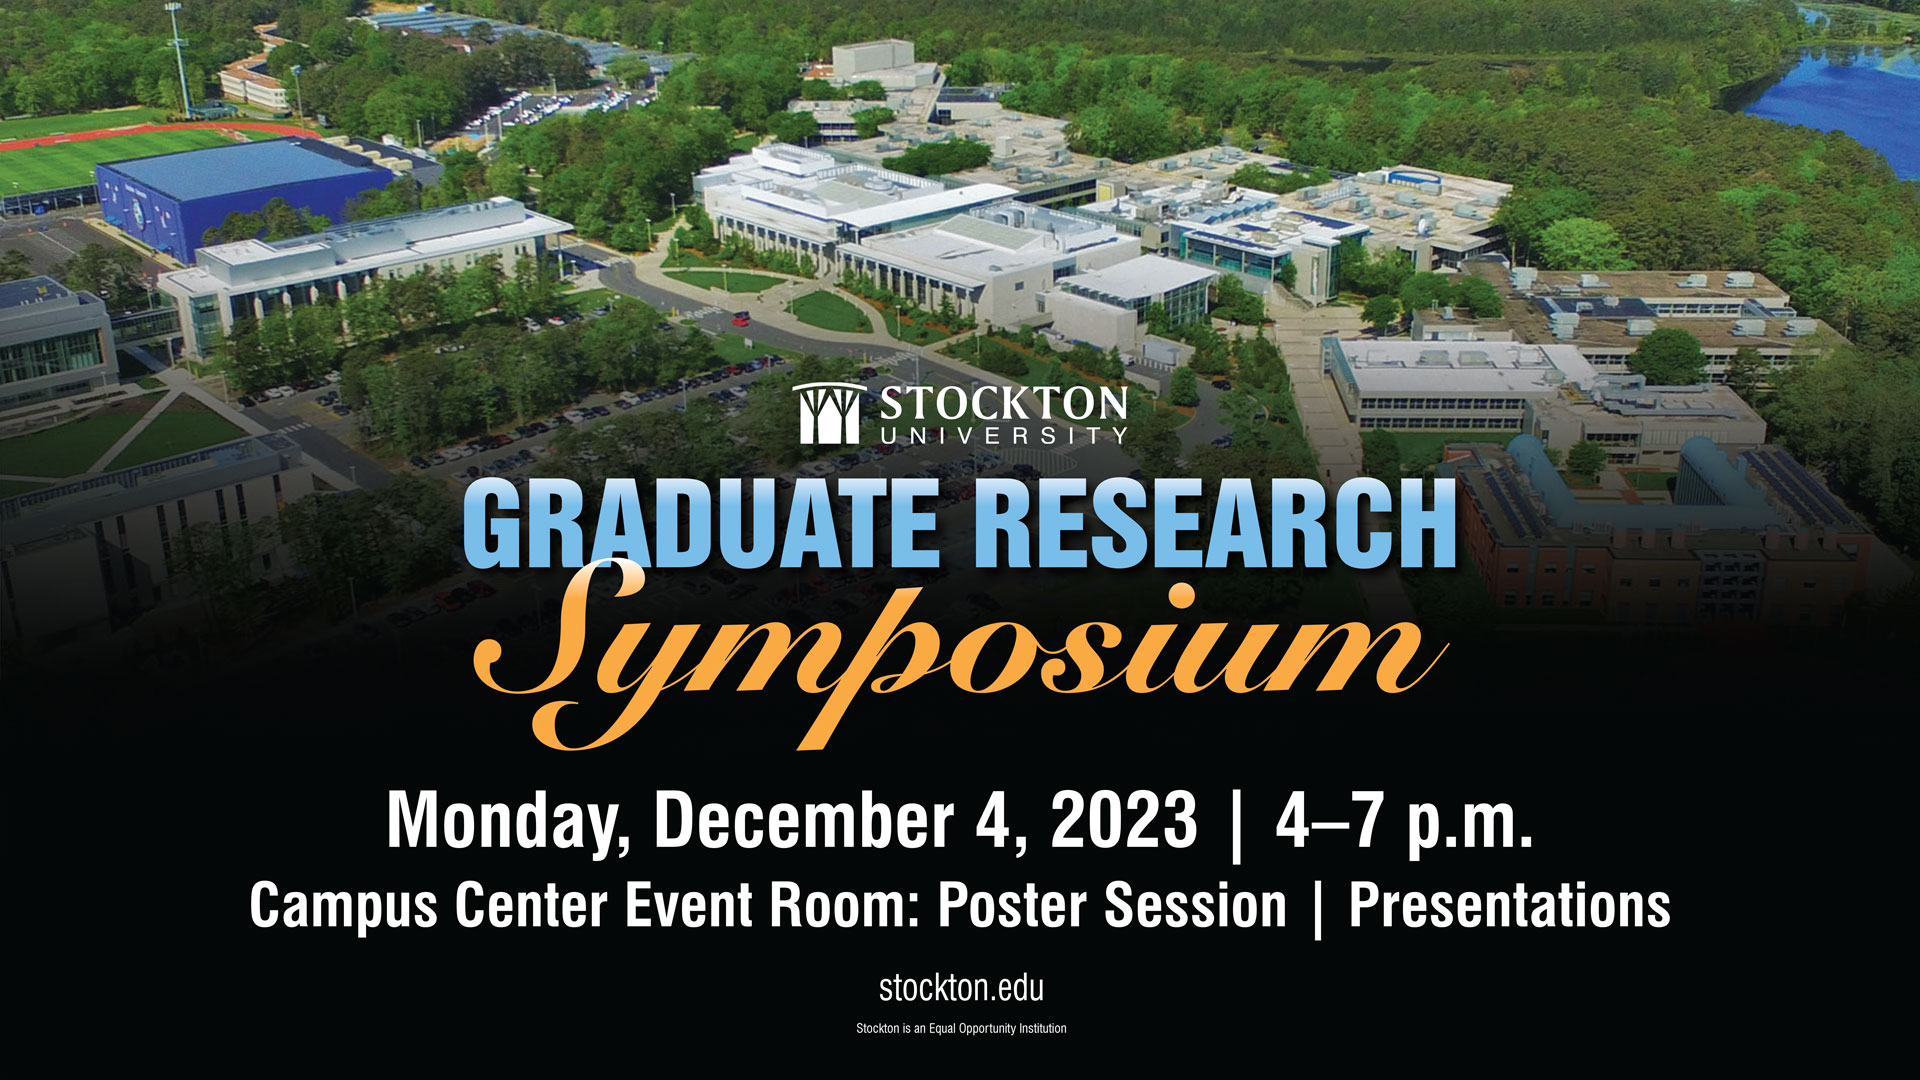 Graduate Research Symposium - Tuesday, May 3, 2022 from 6–8 p.m - Location:  C/D Atrium - Poster Session, C-Wing - Presentations